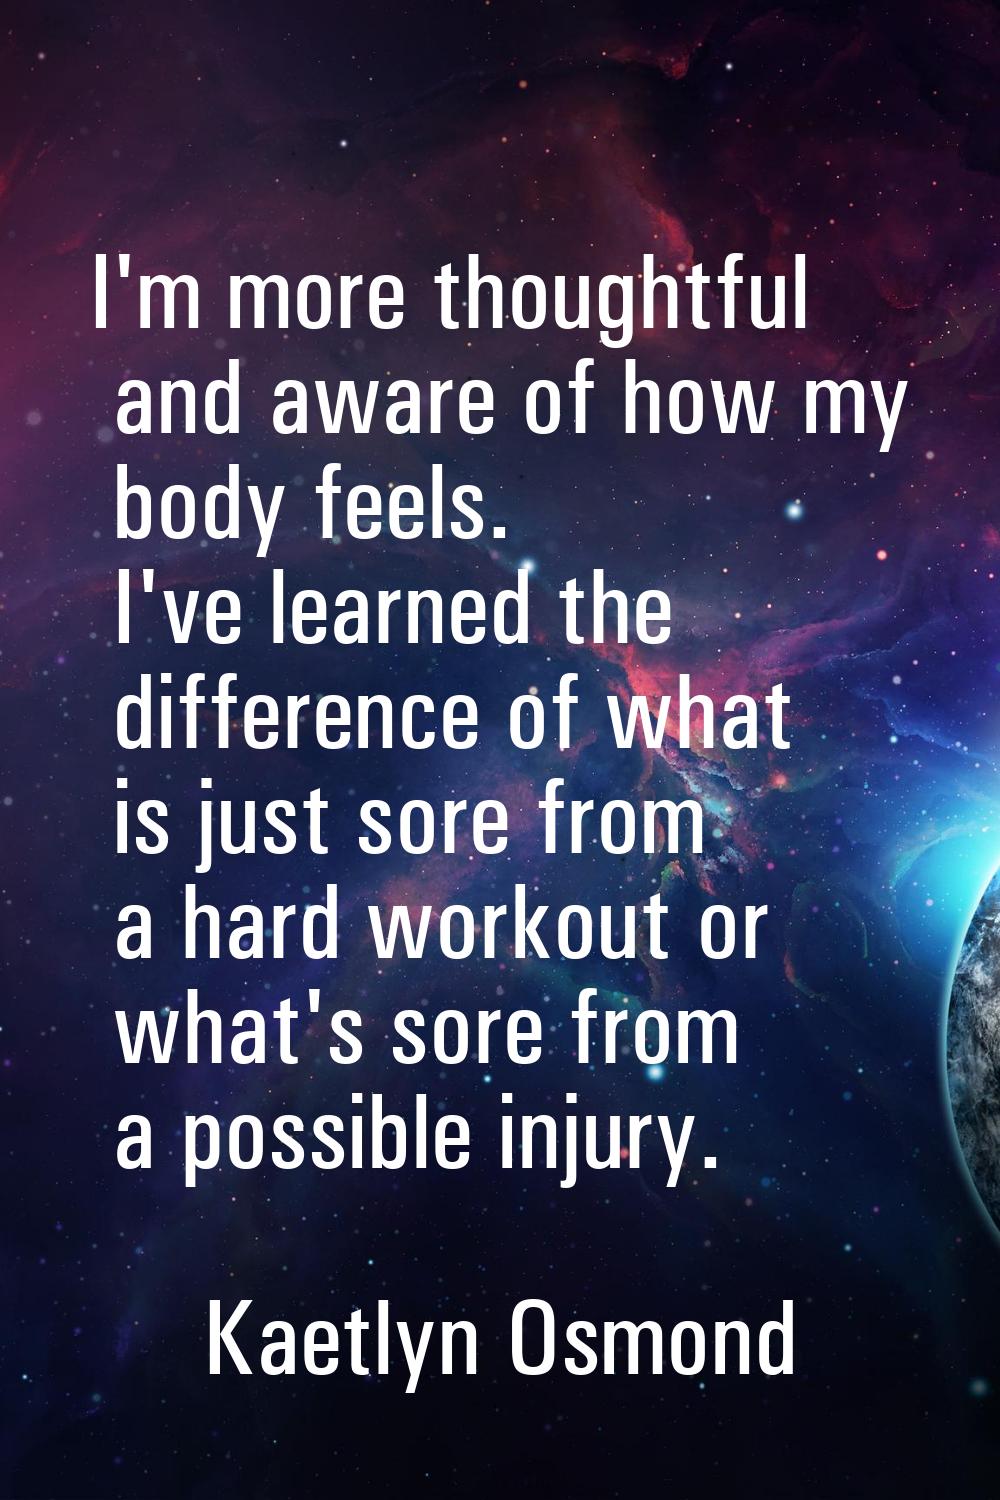 I'm more thoughtful and aware of how my body feels. I've learned the difference of what is just sor